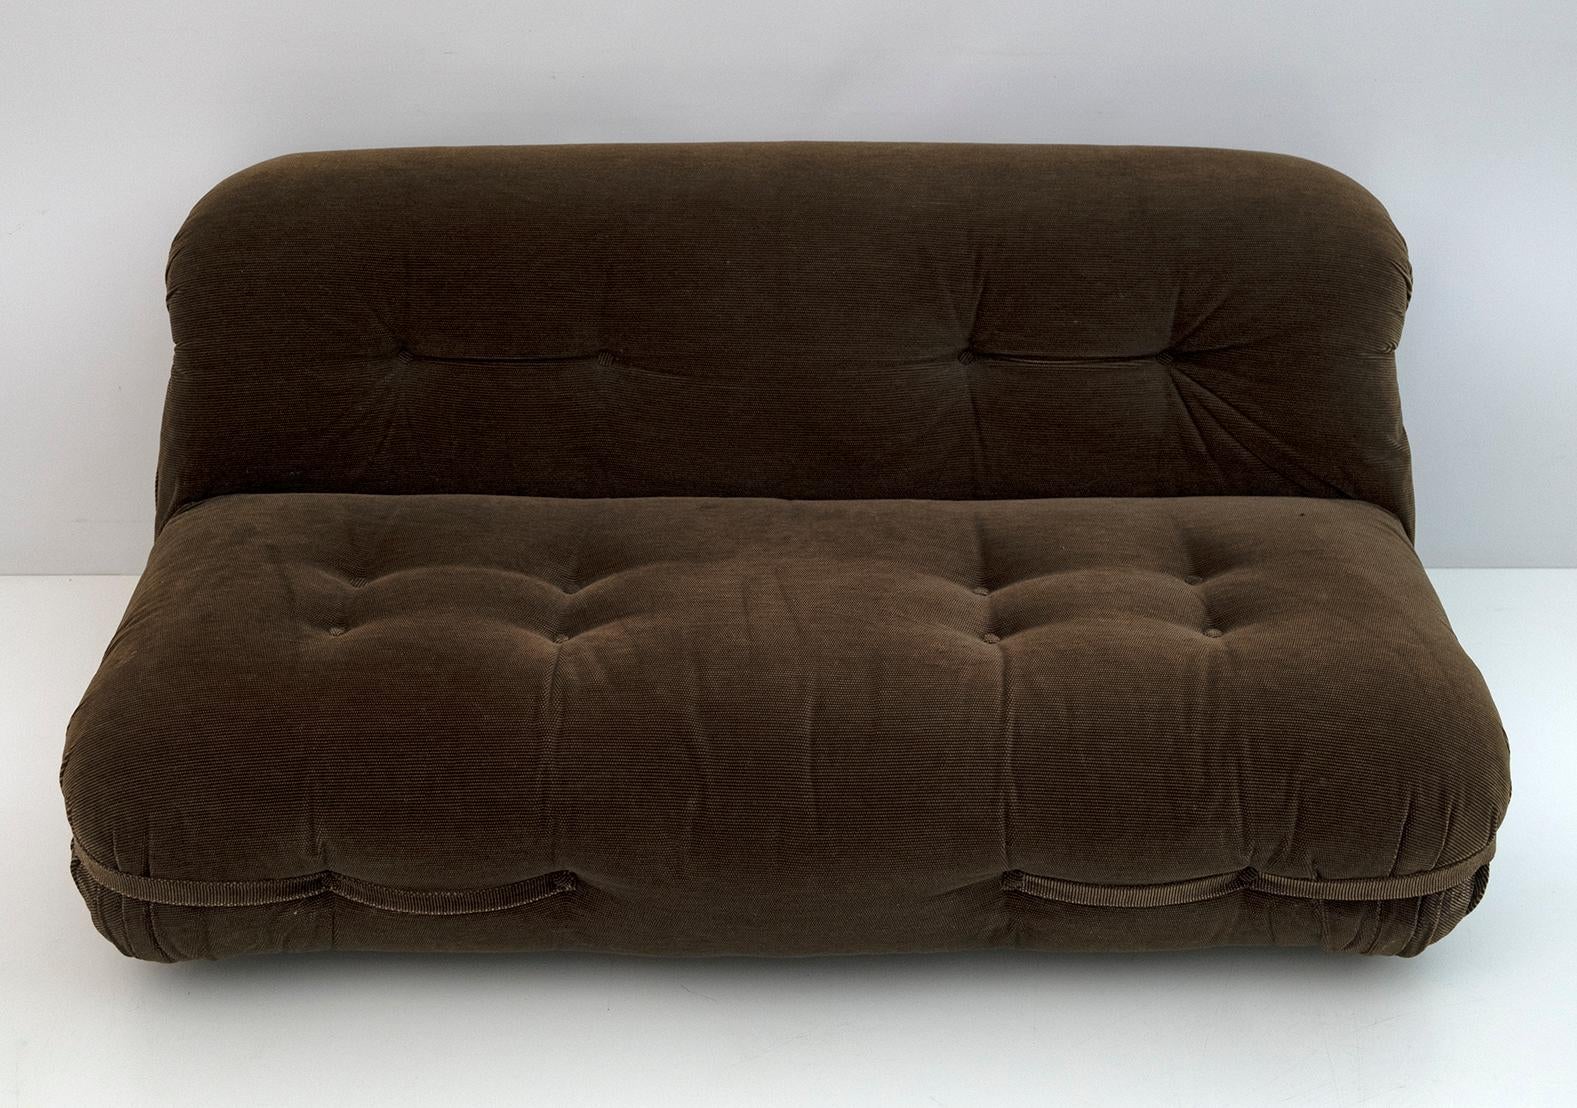 Beautiful two-seater sofa in velvet, Italian production of the Space Age period, 1970s.
Its lines are rounded, with soft shapes, very reminiscent of the Cassina sofas of the 60s / 70s, Soriana, Camaleonda.
The sofa is made of dark brown textured